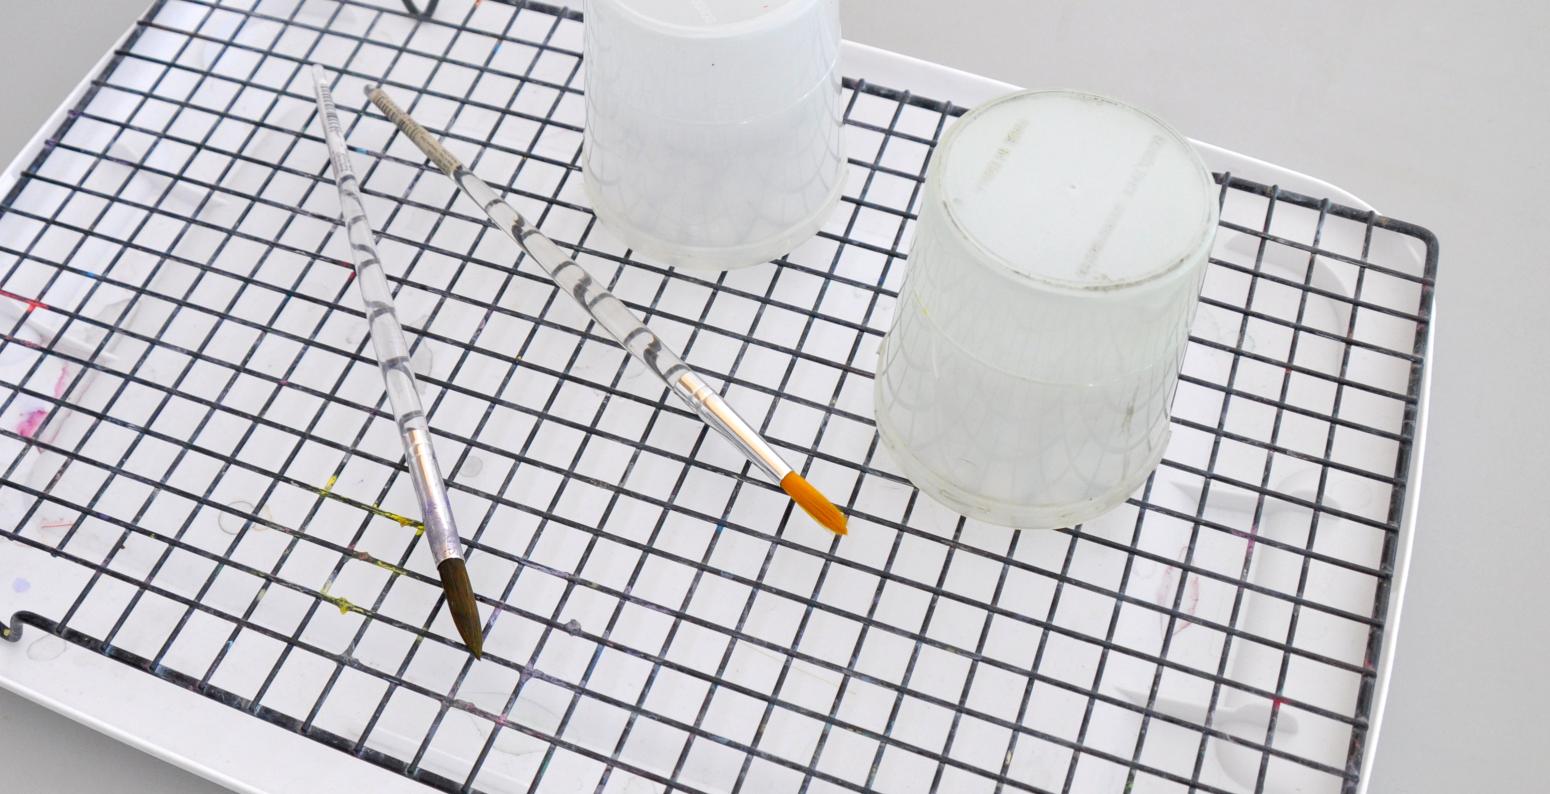 A drying rack made from a lid and a cookie drying sheet, with two brushes and two cups sitting on top drying.